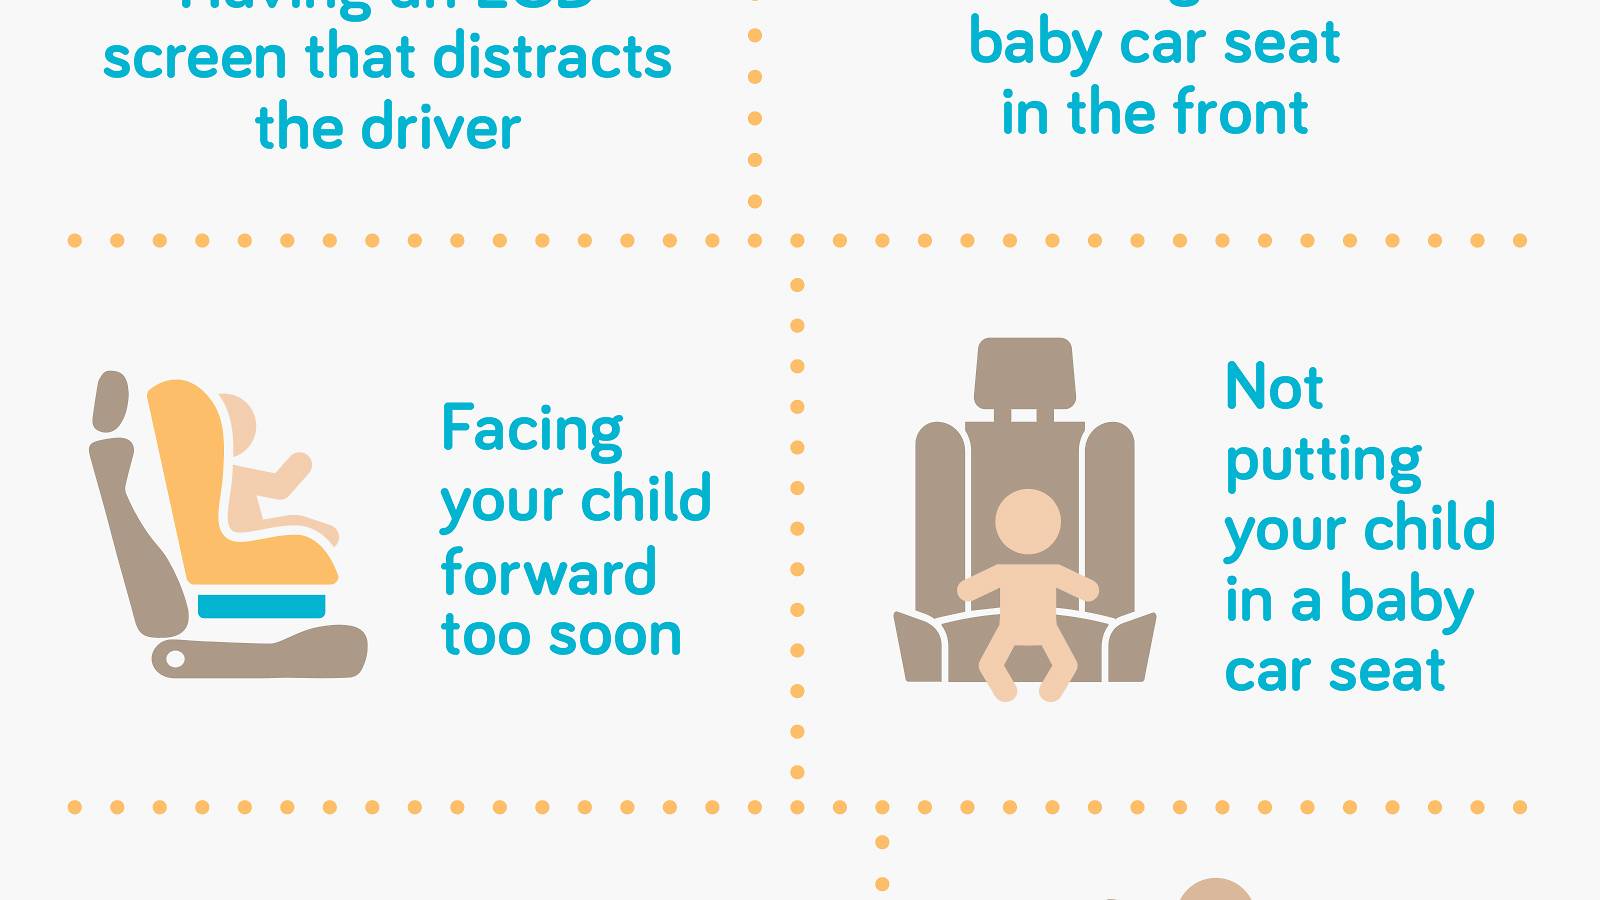 Parents-10-ways-you're-making-your-car-unsafe-for-your-child-[Infographic]_03